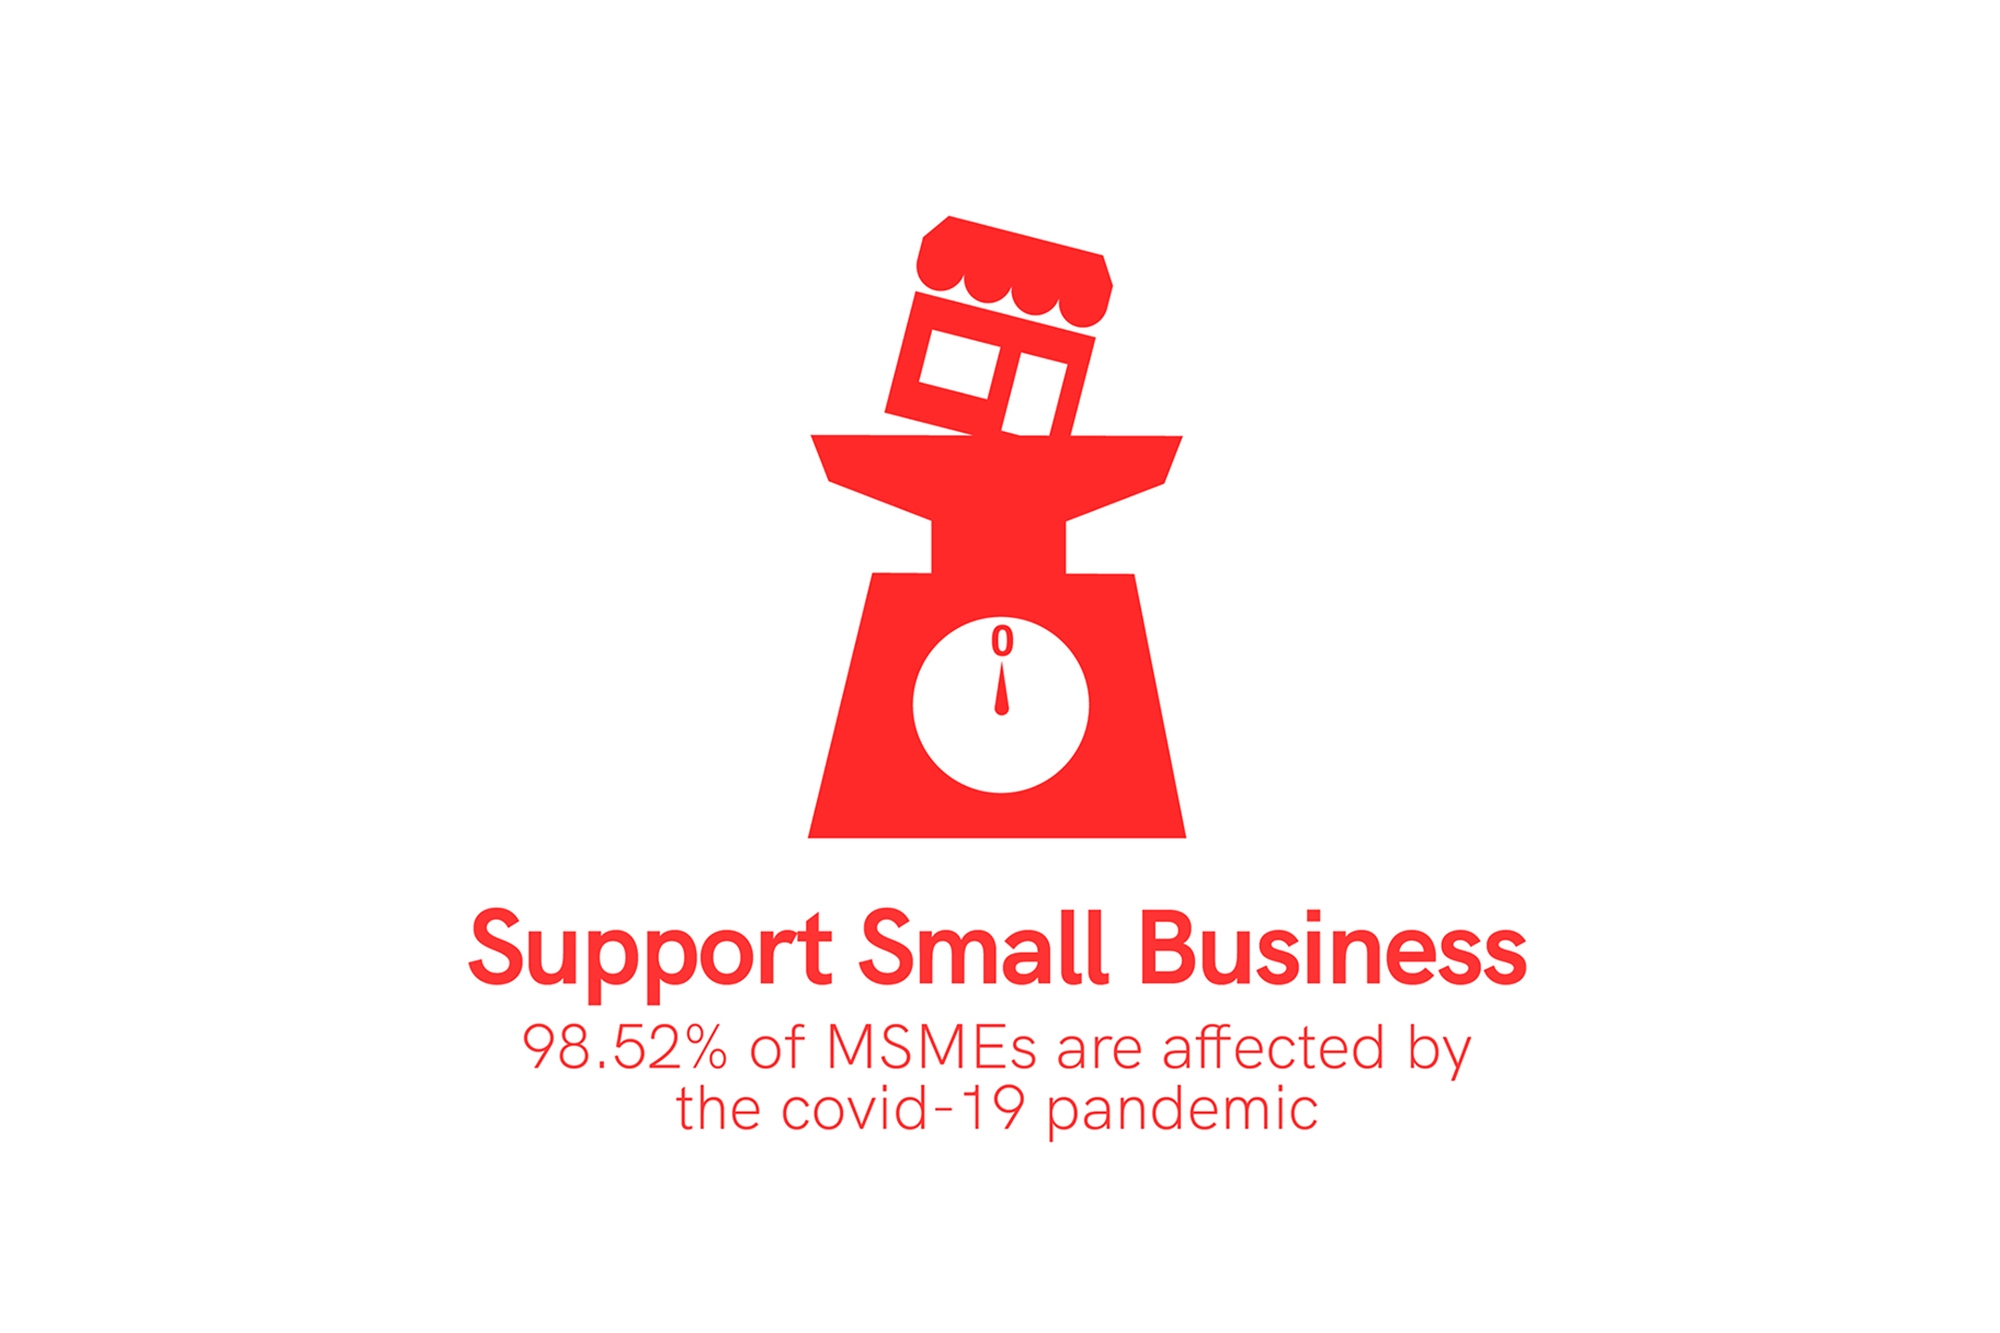 98.52% of MSMEs are affected by the covid-19 pandemic